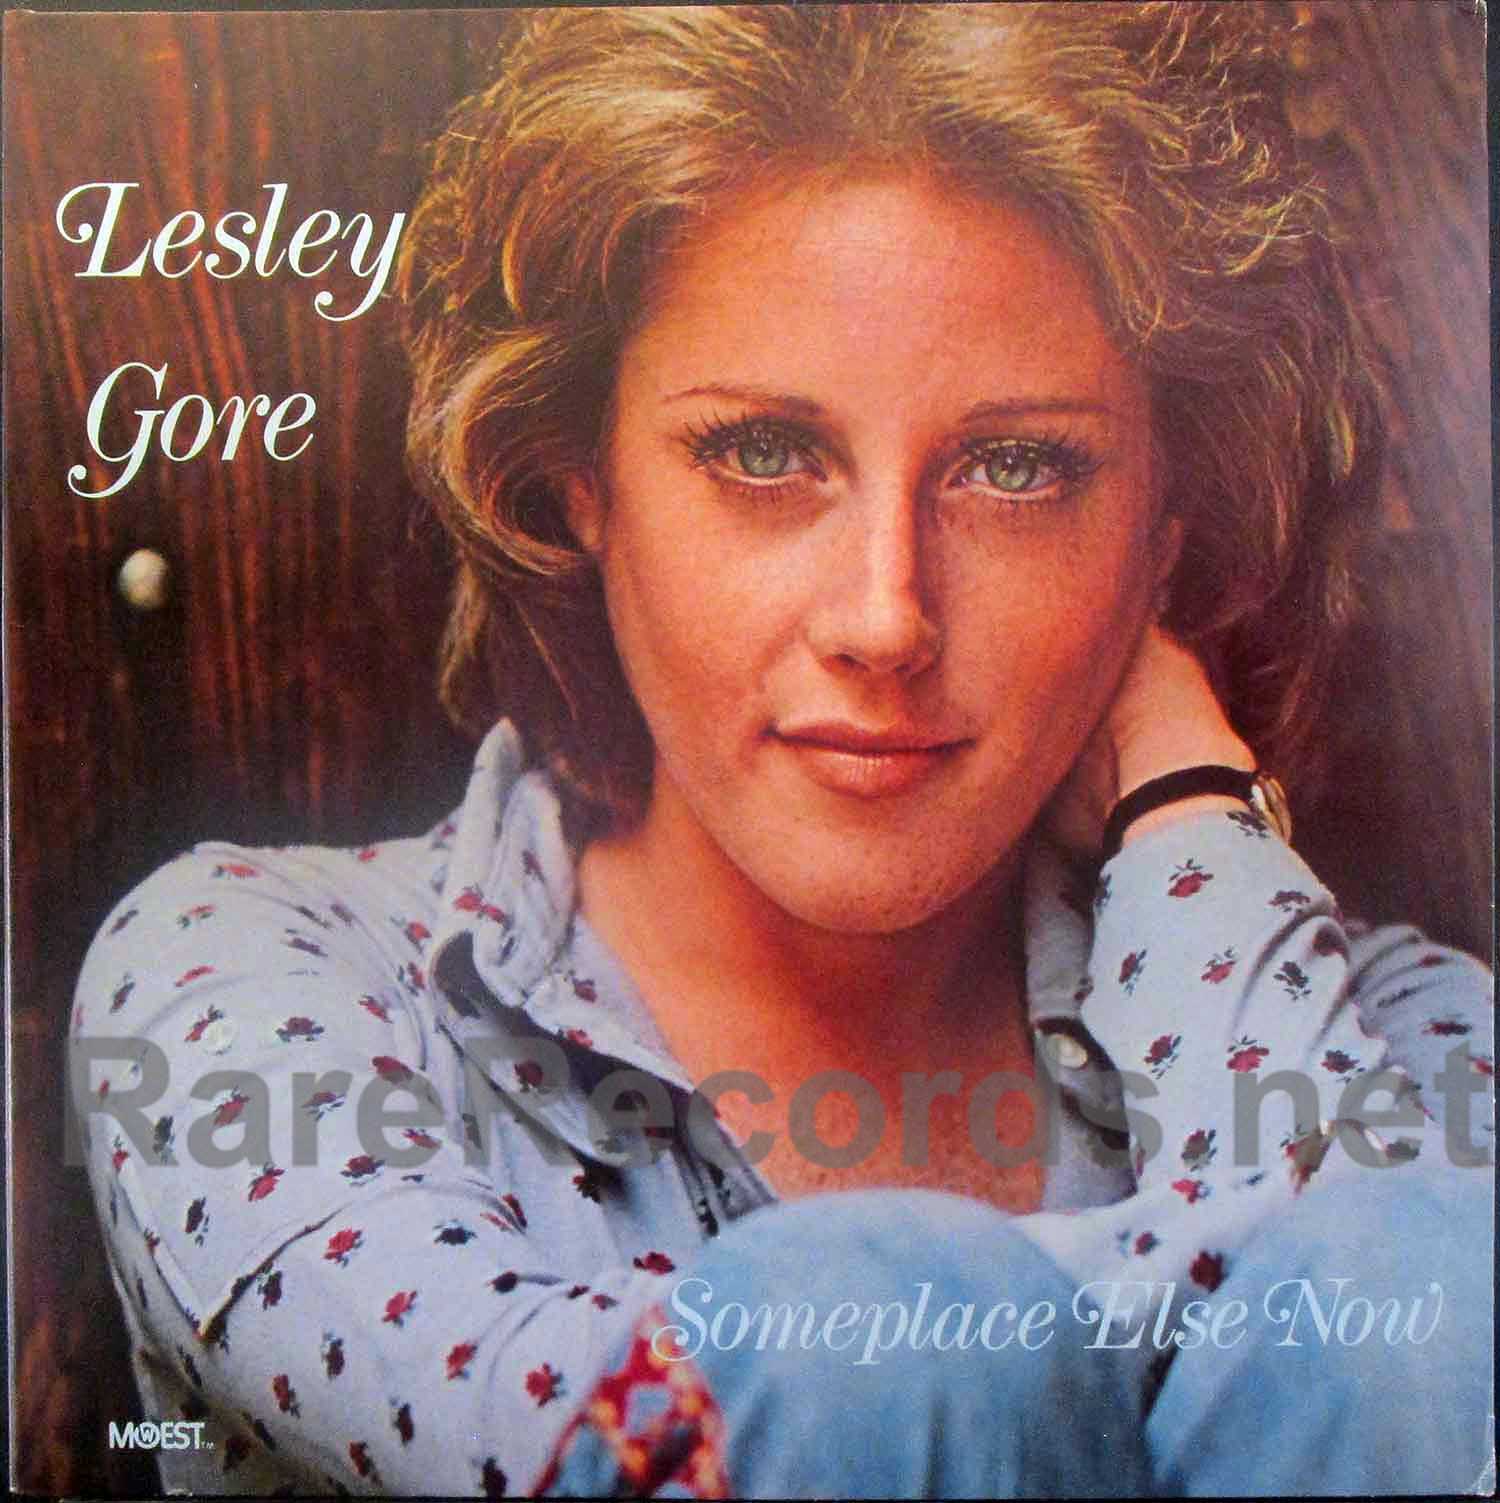 lesley gore - someplace else now u.s. lp